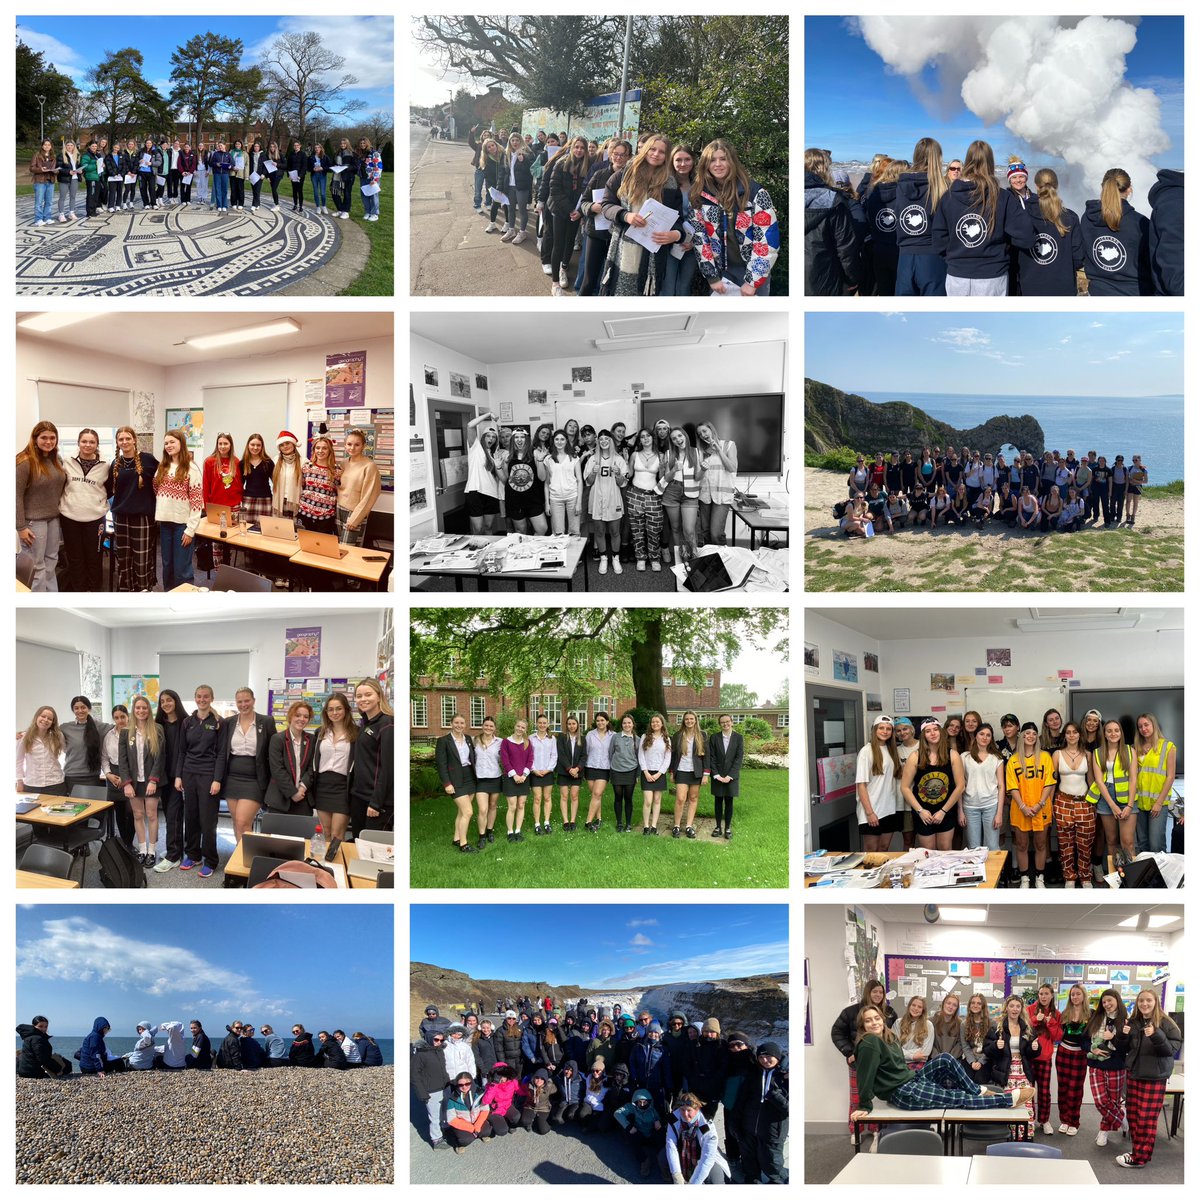 Our wonderful #BGSYear13 #ALevel #Geographers start their study leave today 🌎Wishing you all the best for the future 🌍 The world needs #geographers like you! #KeepGeogging 🌏